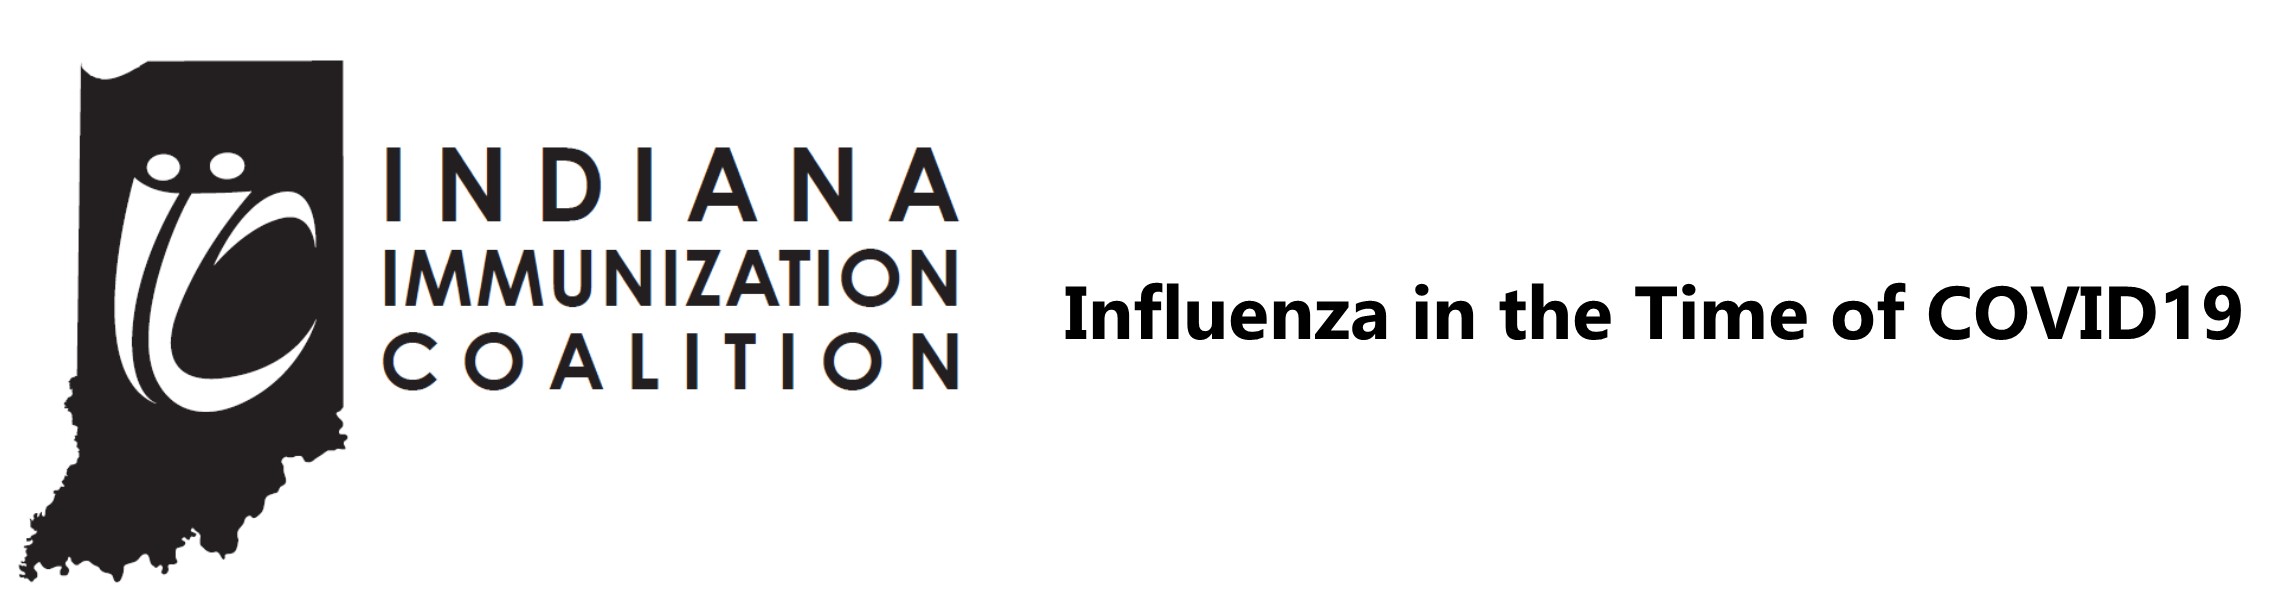 Influenza in the Time of COVID 19 Webinar Banner